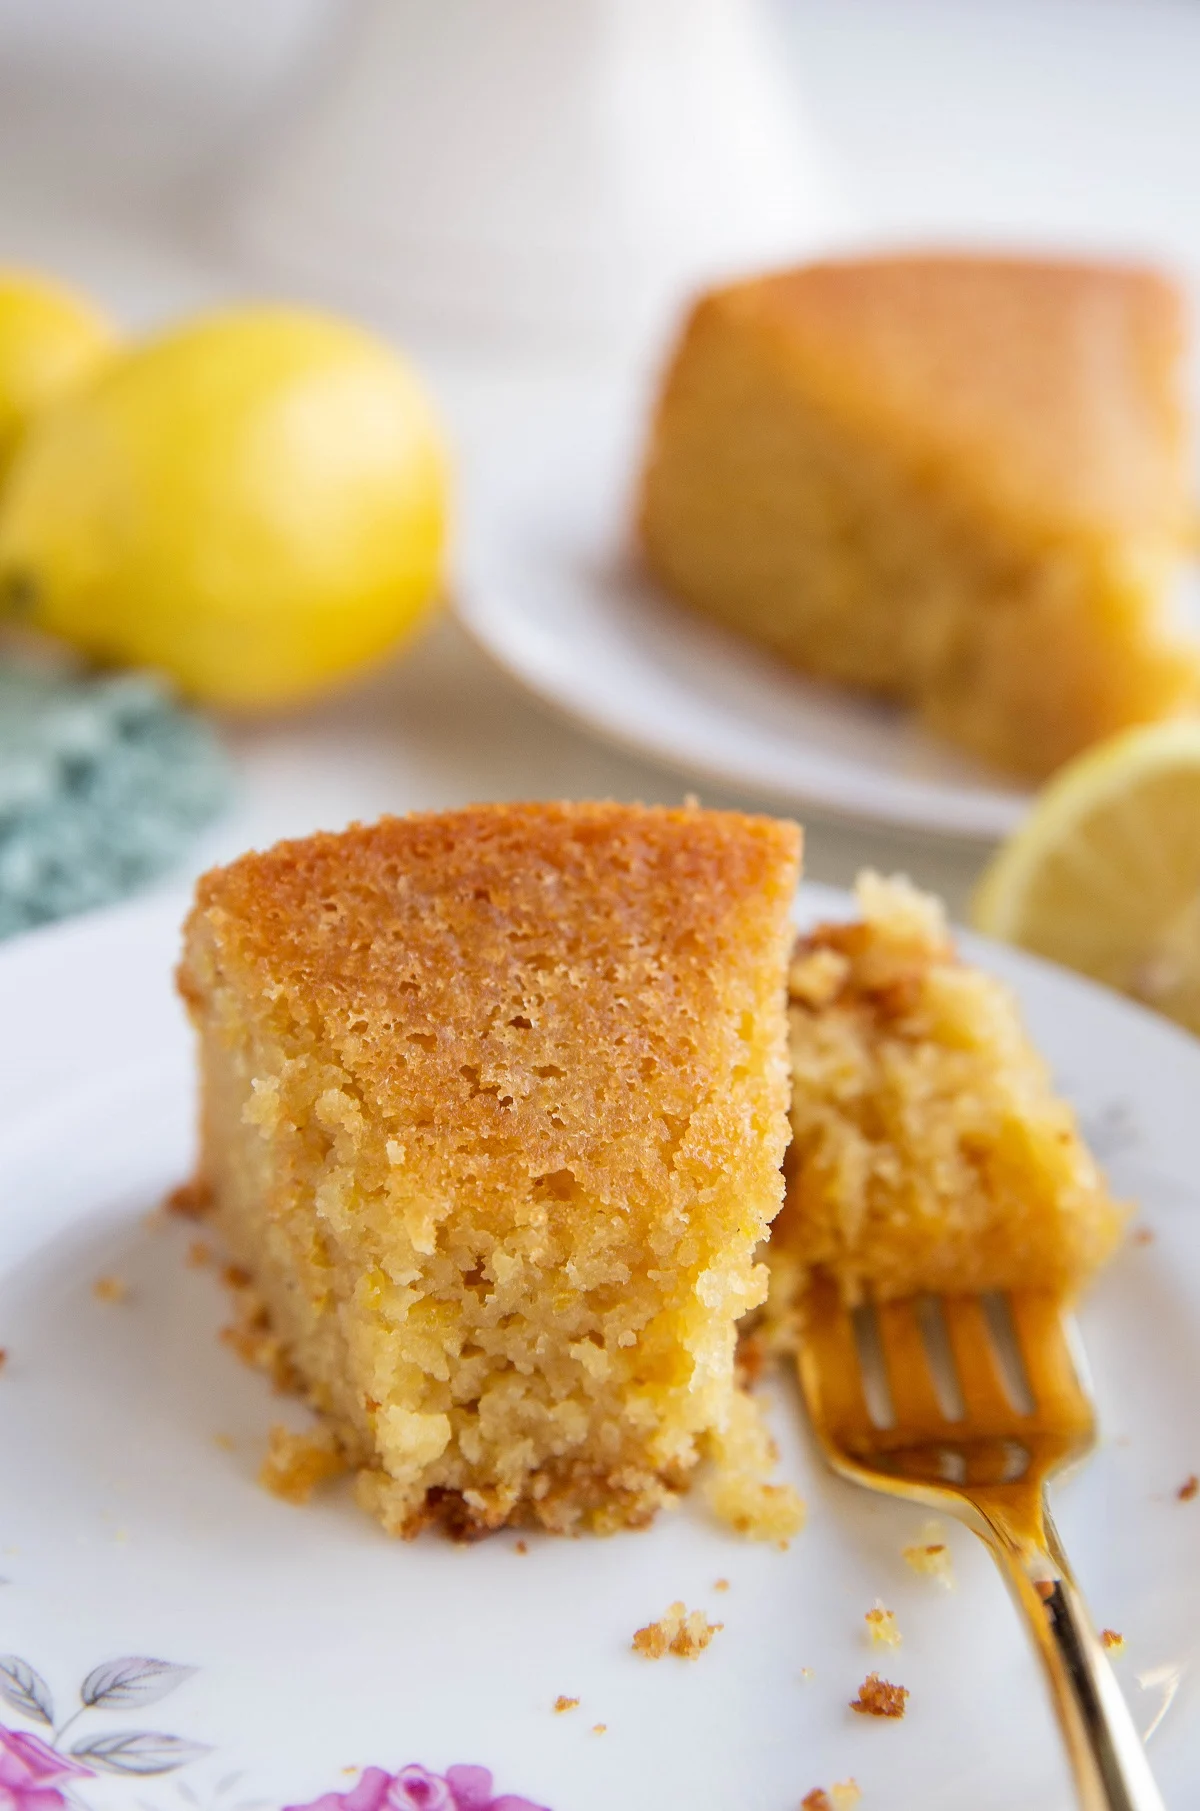 Close up on a slice of lemon cake with a bite taken out so you can see the moist texture.